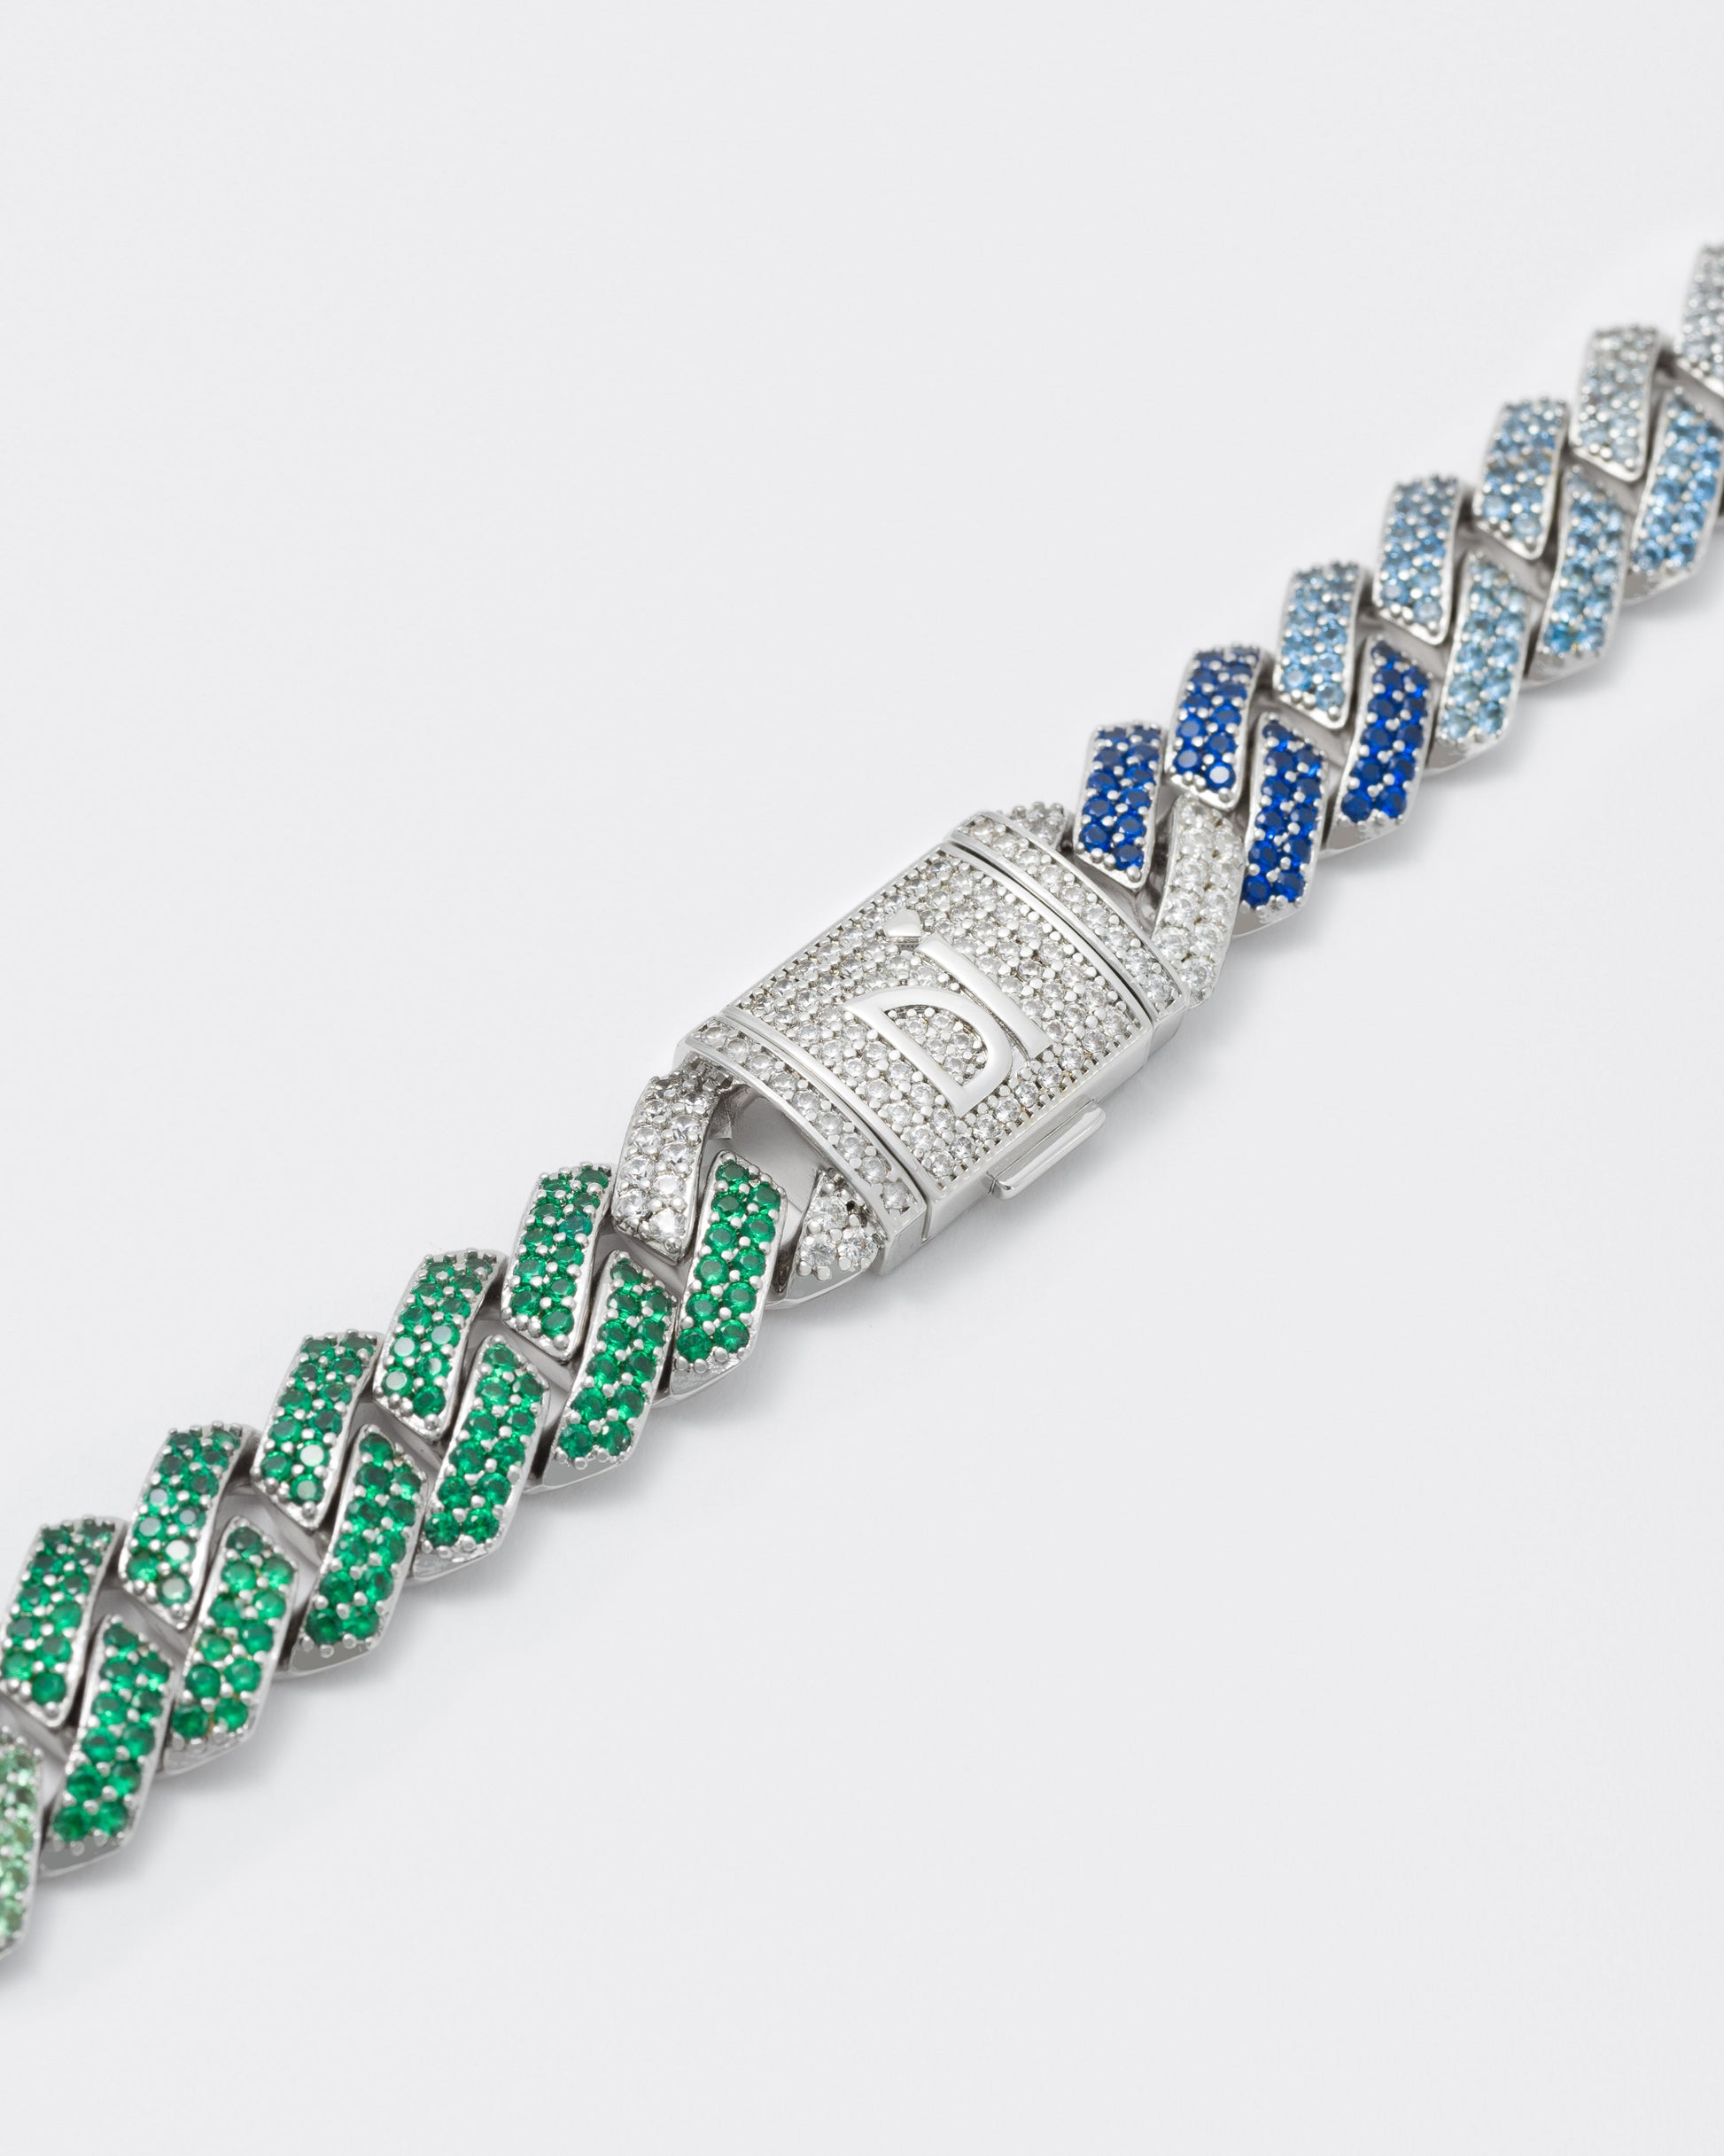 detail of 18k white gold coated prong chain necklace with hand-set micropavé stones in gradient white, brazil green, green, aquamarine, tanzanite and sapphire blue